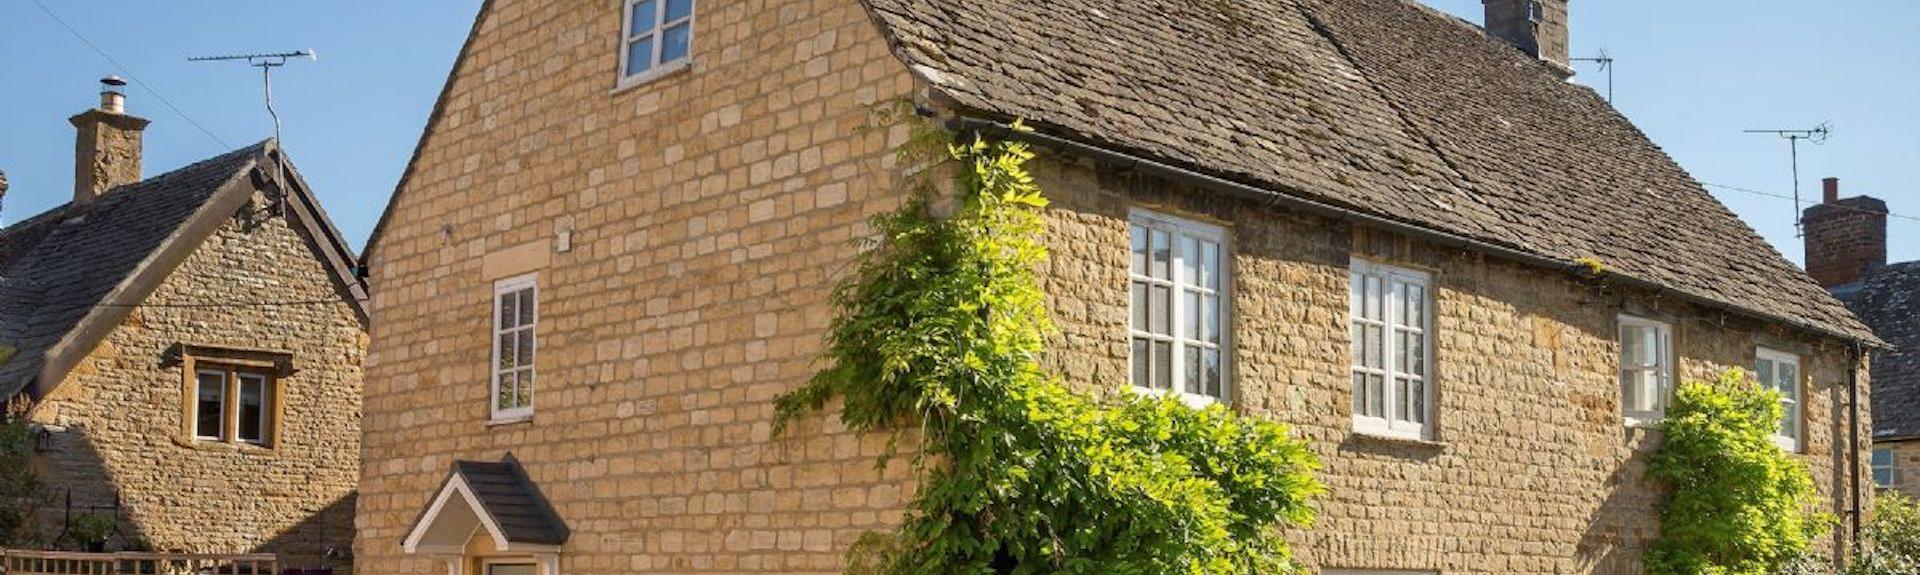 A semi-detached Cotswold honeystone cottage with wisteria-clad walls